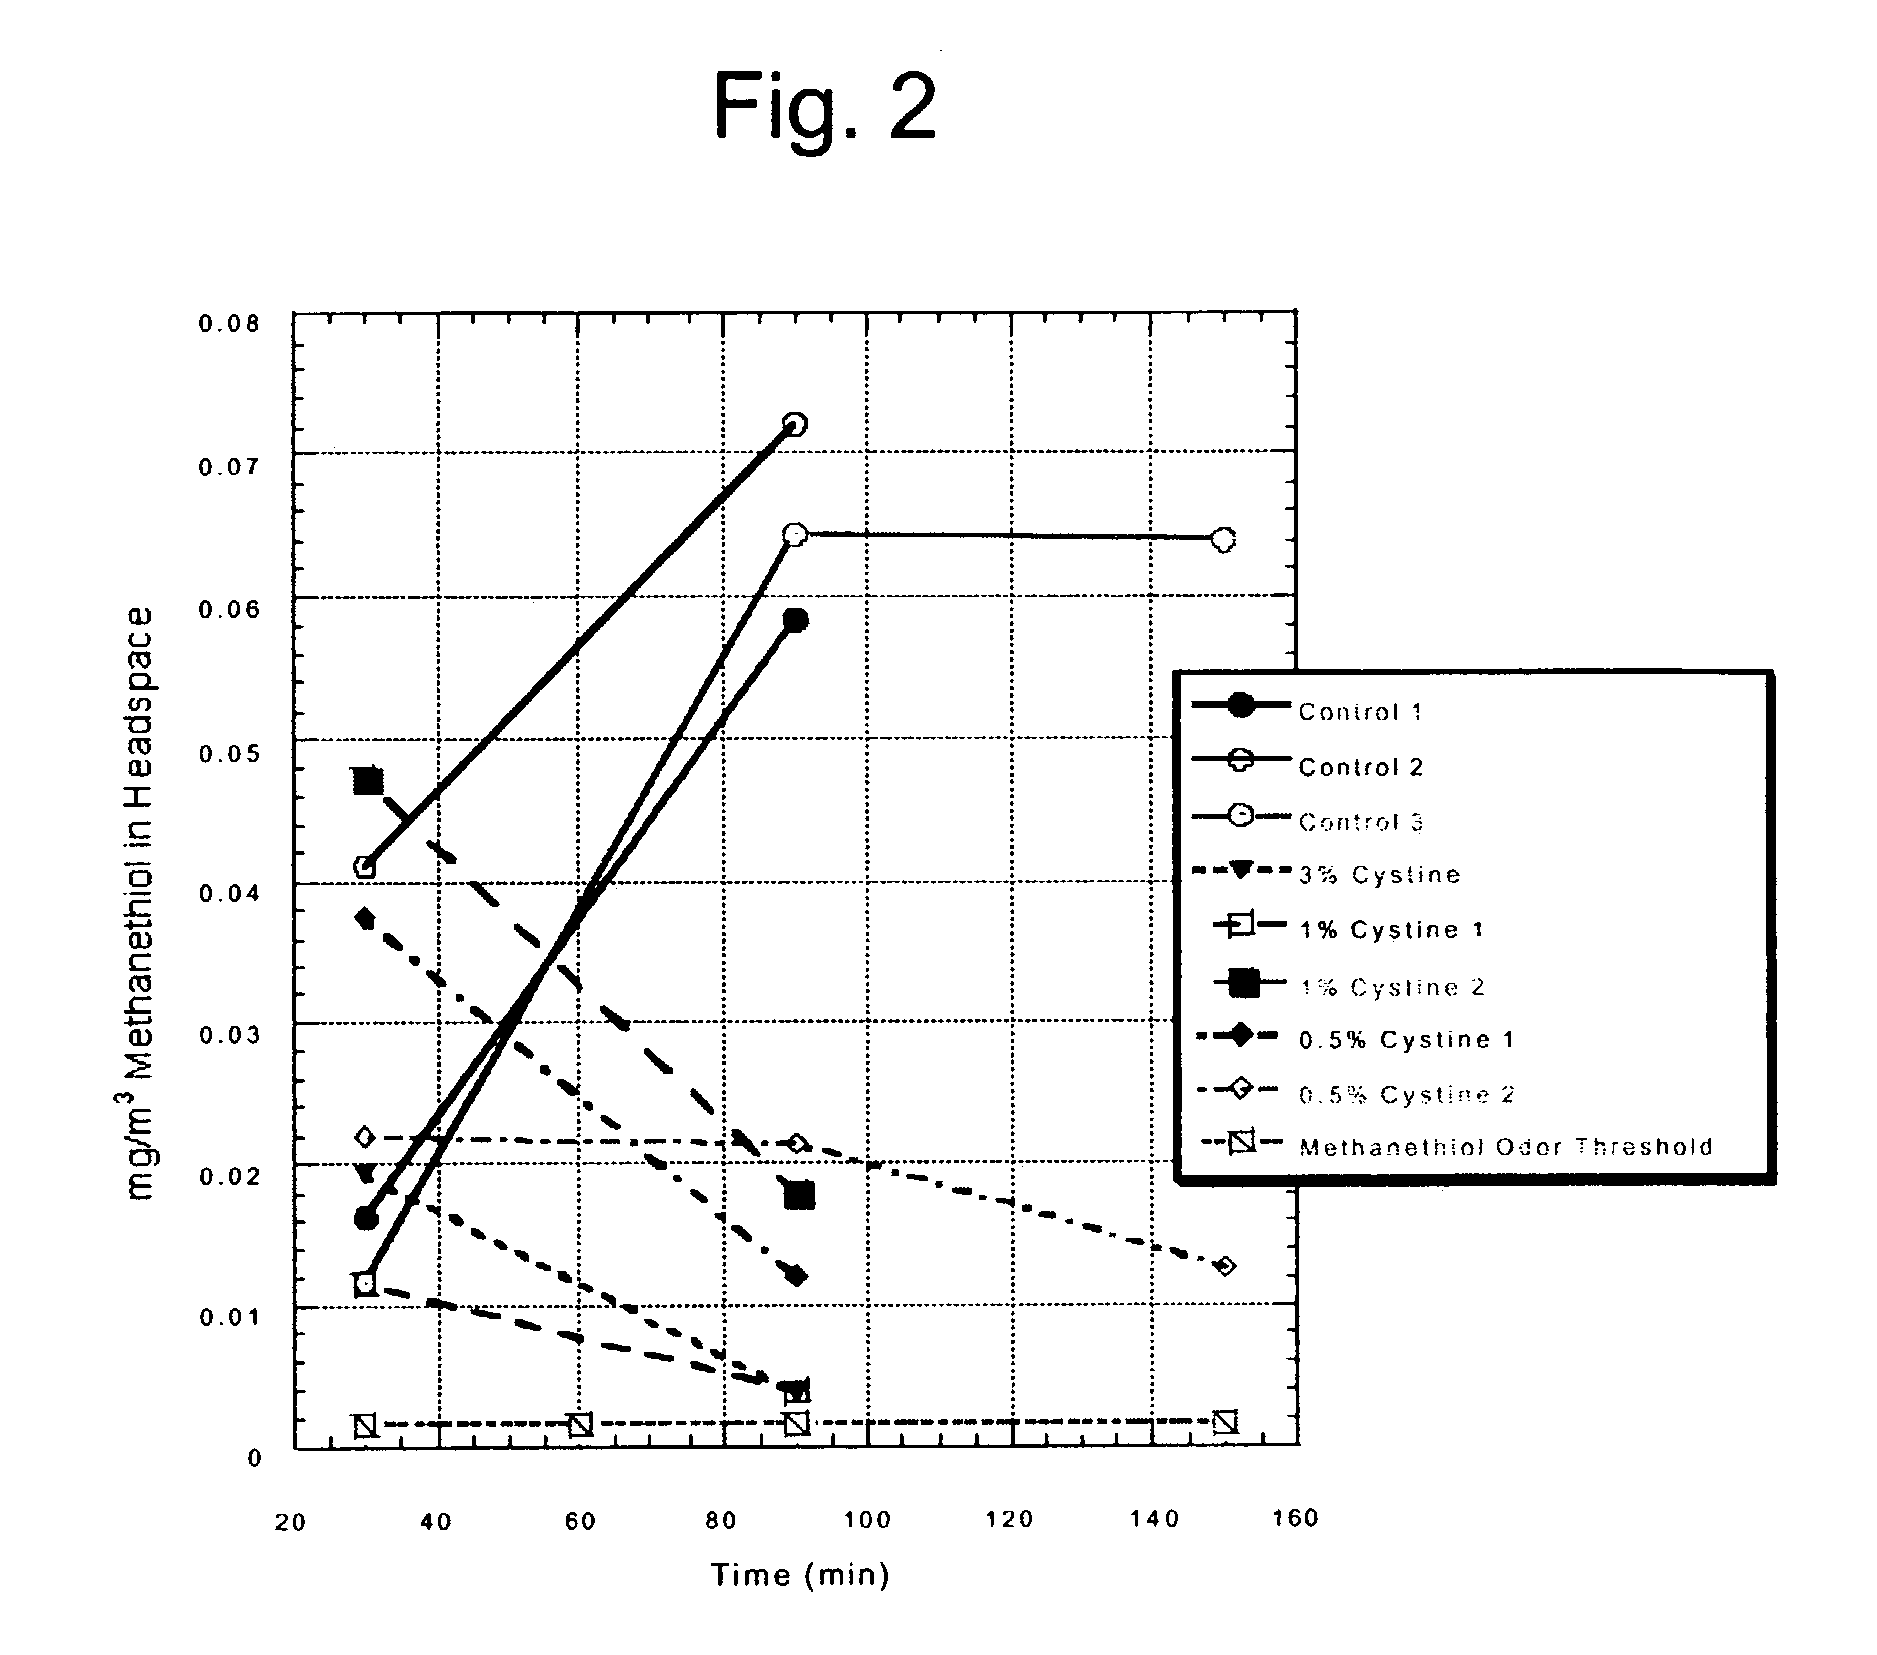 Modified soy products and methods for reducing odor and improving flavor of soy products